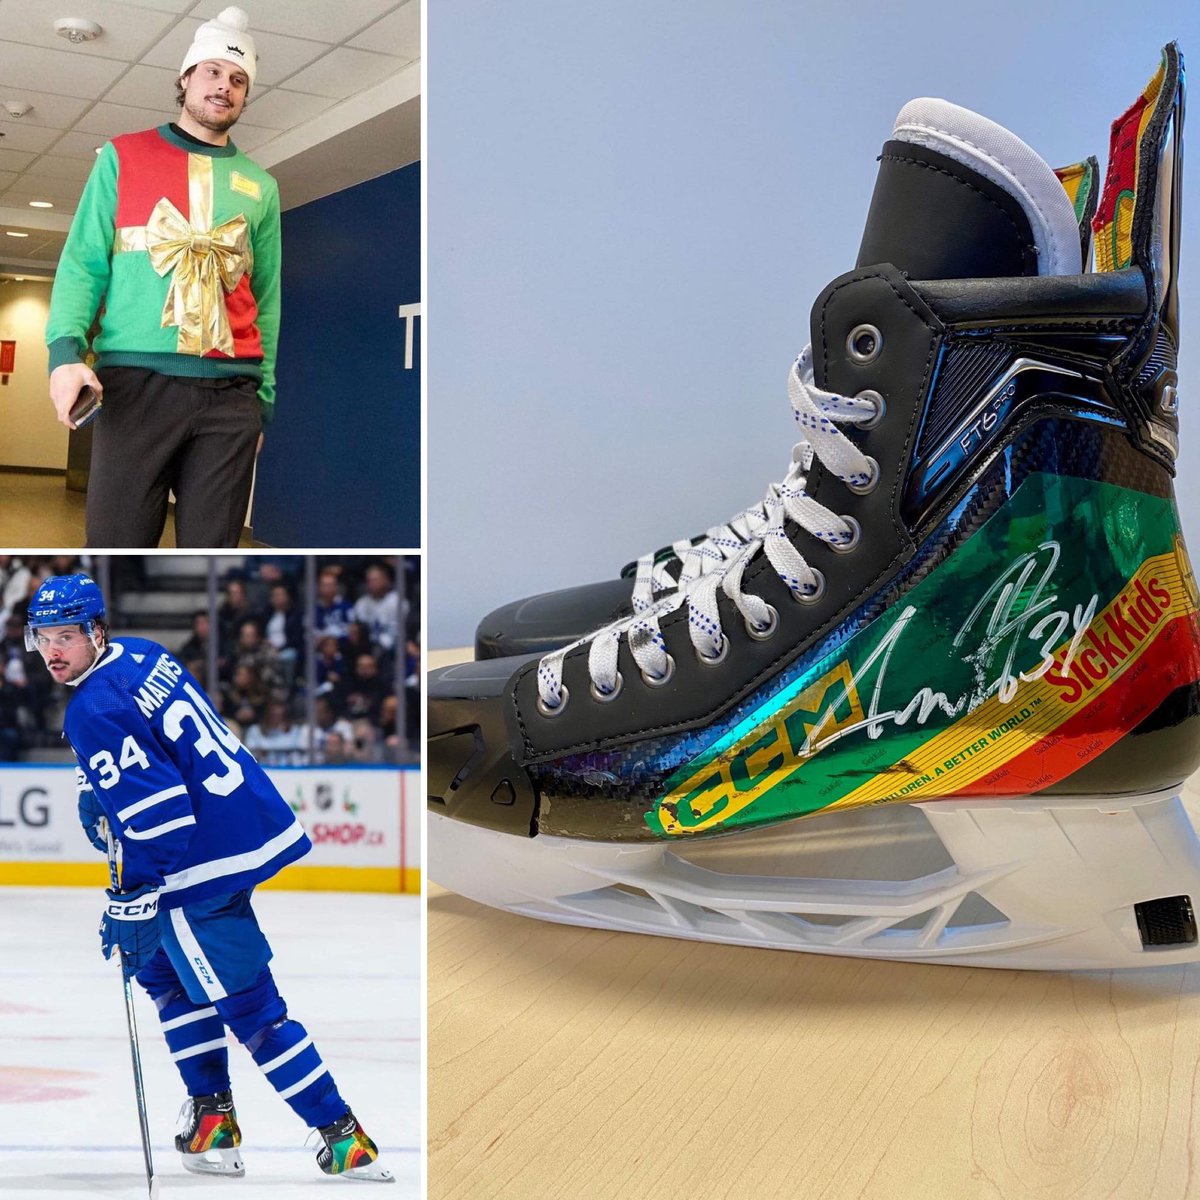 🚨 Auston auction alert 🚨 Make these bow-wrapped beauties yours! @AM34 is giving you a chance to own his autographed, game-worn CCM #SweaterLove skates inspired by @VancityReynolds. Visit the auction➡️ bit.ly/3WCPijr. All proceeds support SickKids! 💙✨ #Leafsforever